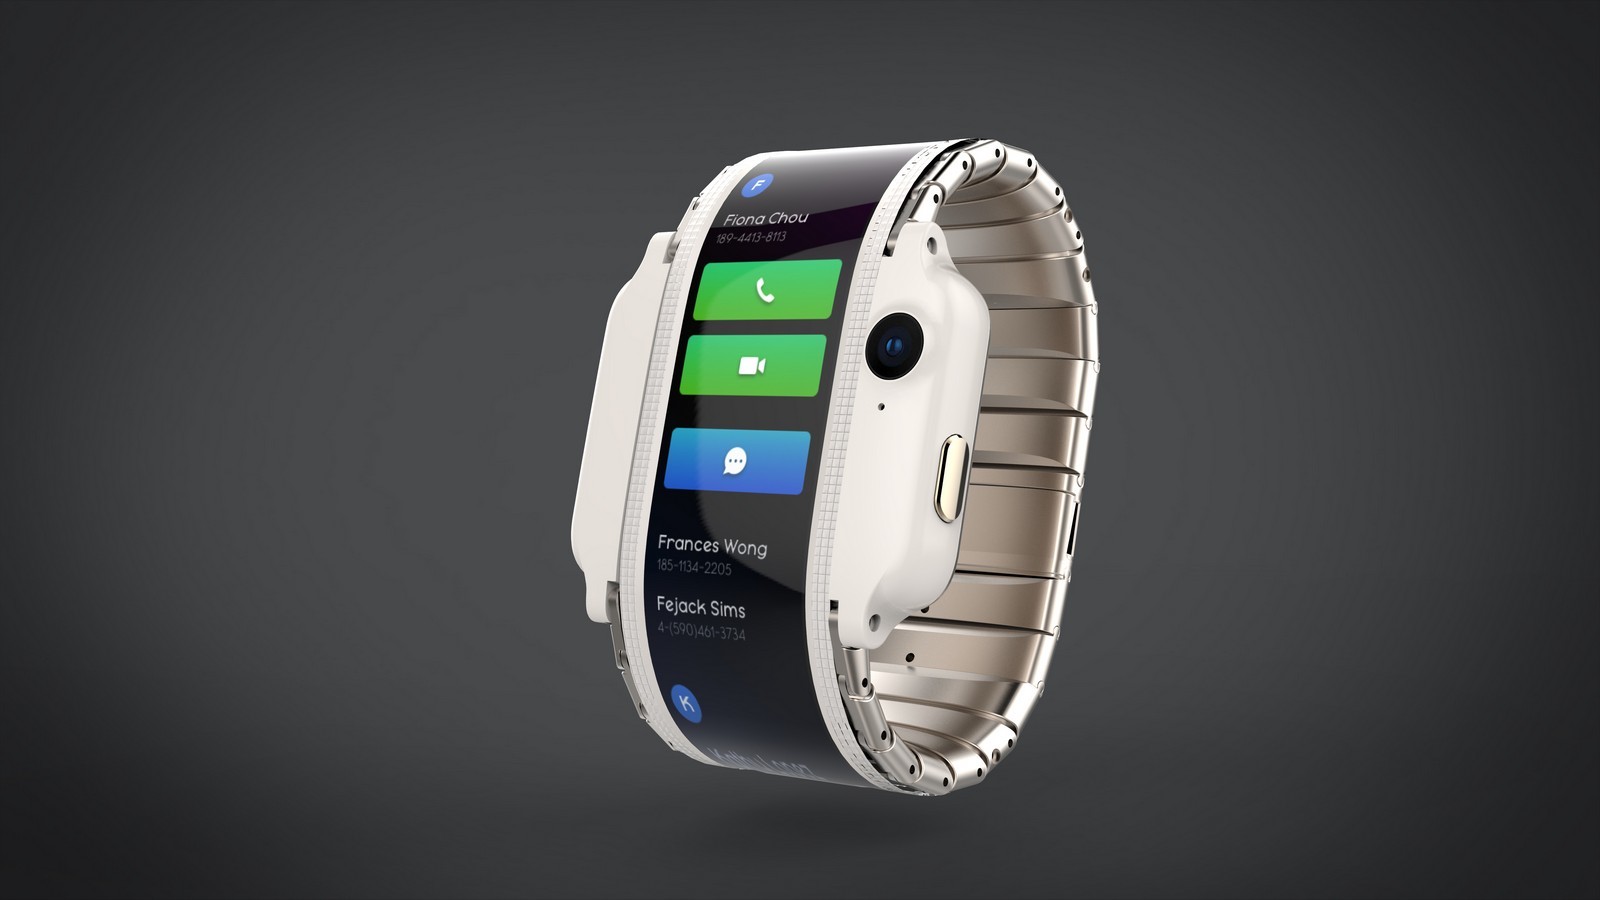 Meet the crazy nubia-a, a cell phone on your wrist